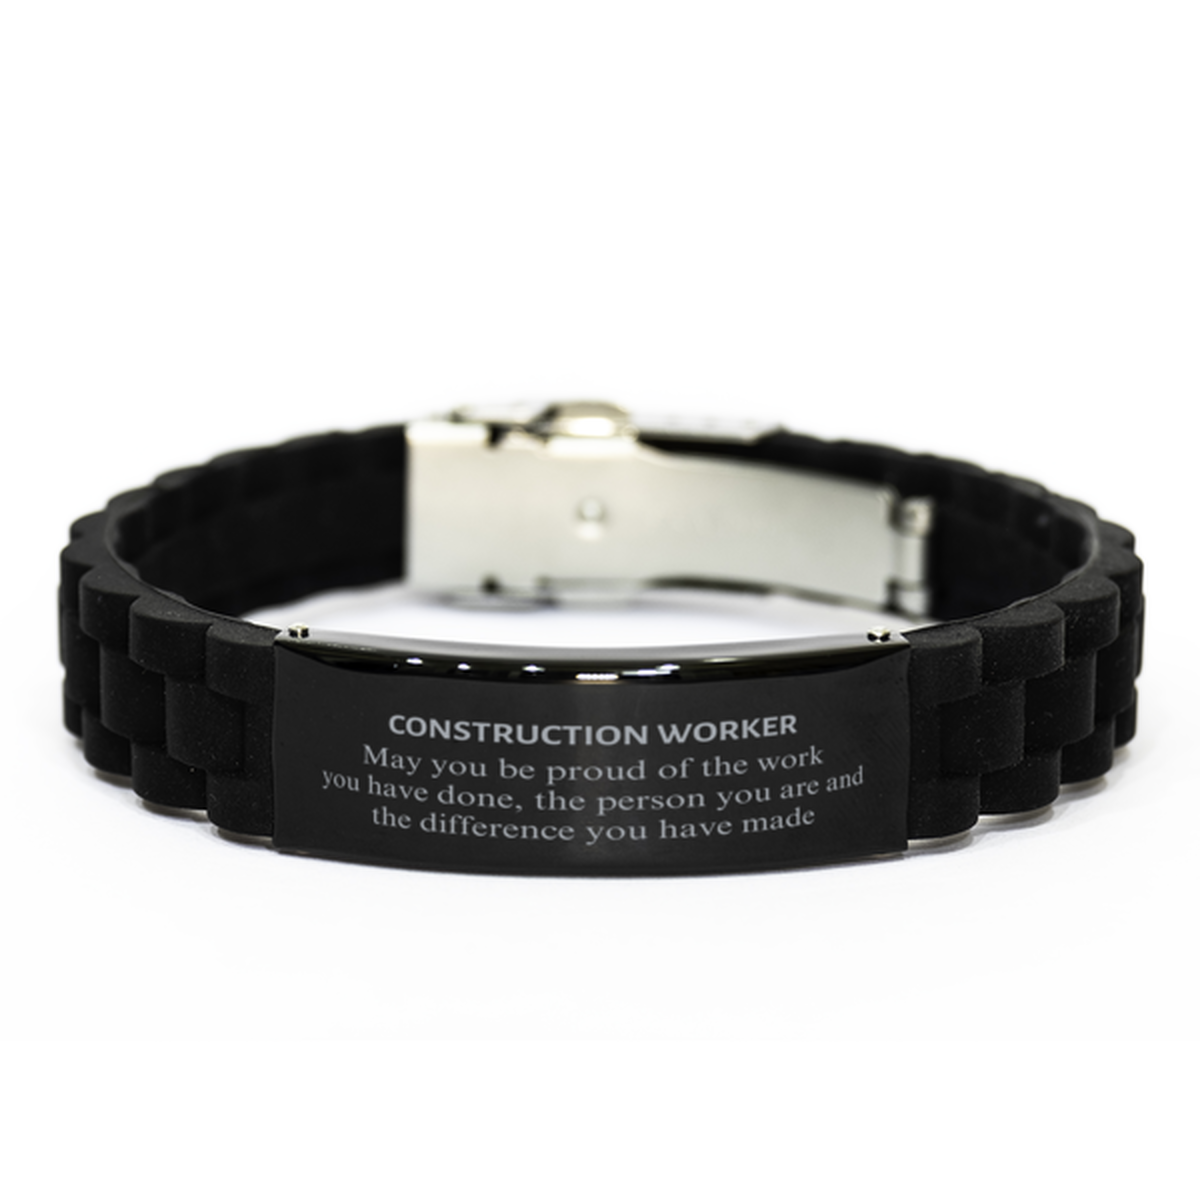 Construction Worker May you be proud of the work you have done, Retirement Construction Worker Black Glidelock Clasp Bracelet for Colleague Appreciation Gifts Amazing for Construction Worker